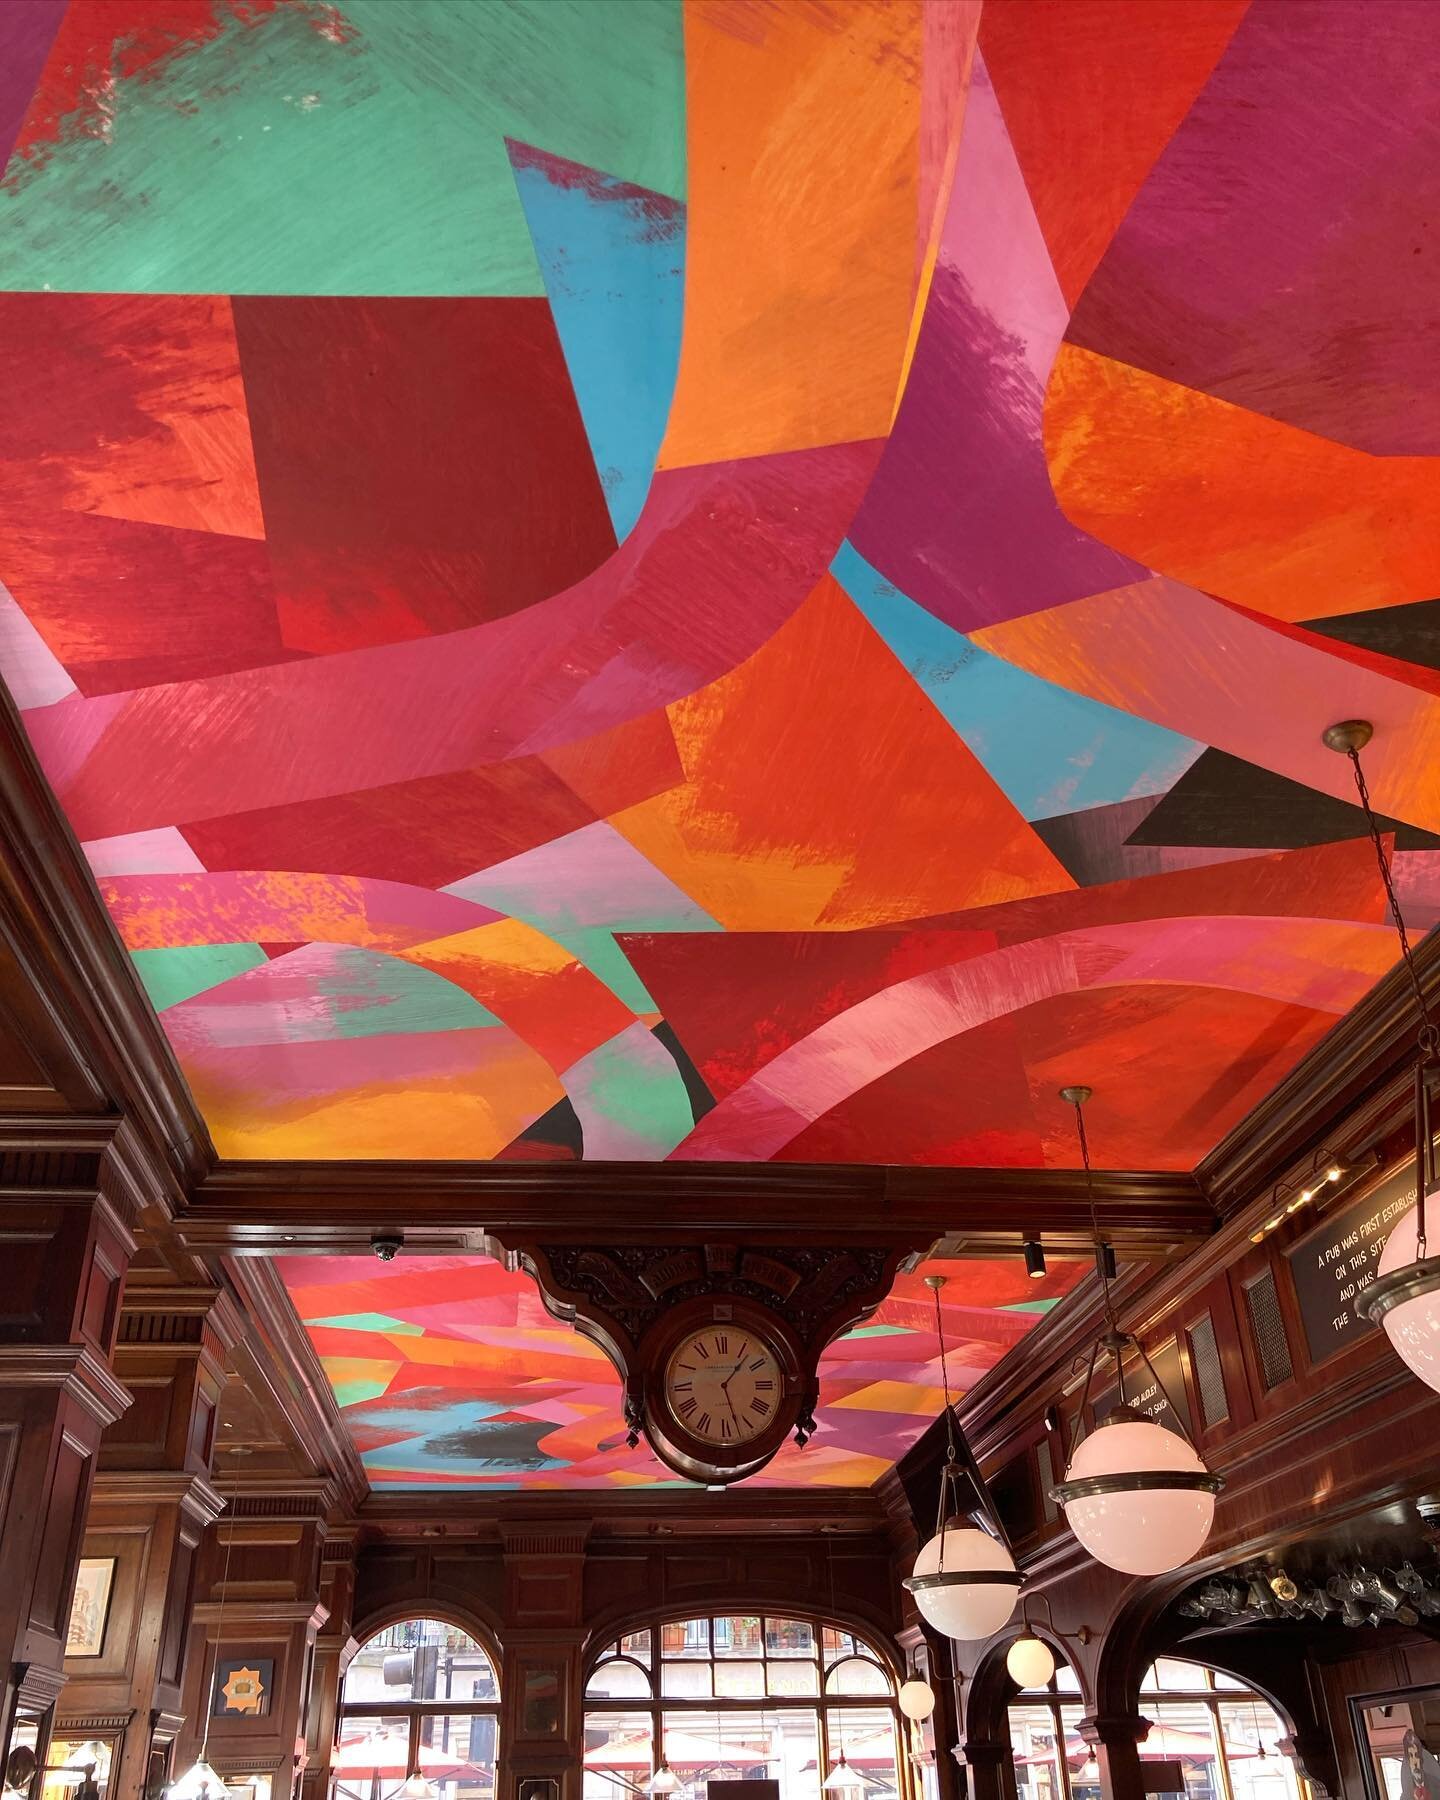 A great day in London Town meeting the fab new team @farmshopuk at their new London home in the heart of Mayfair. A bonus was getting to have the meeting across the road at the lovely @audleypublichouse, ahhh the ceiling of dreams! 

Opening soon, th